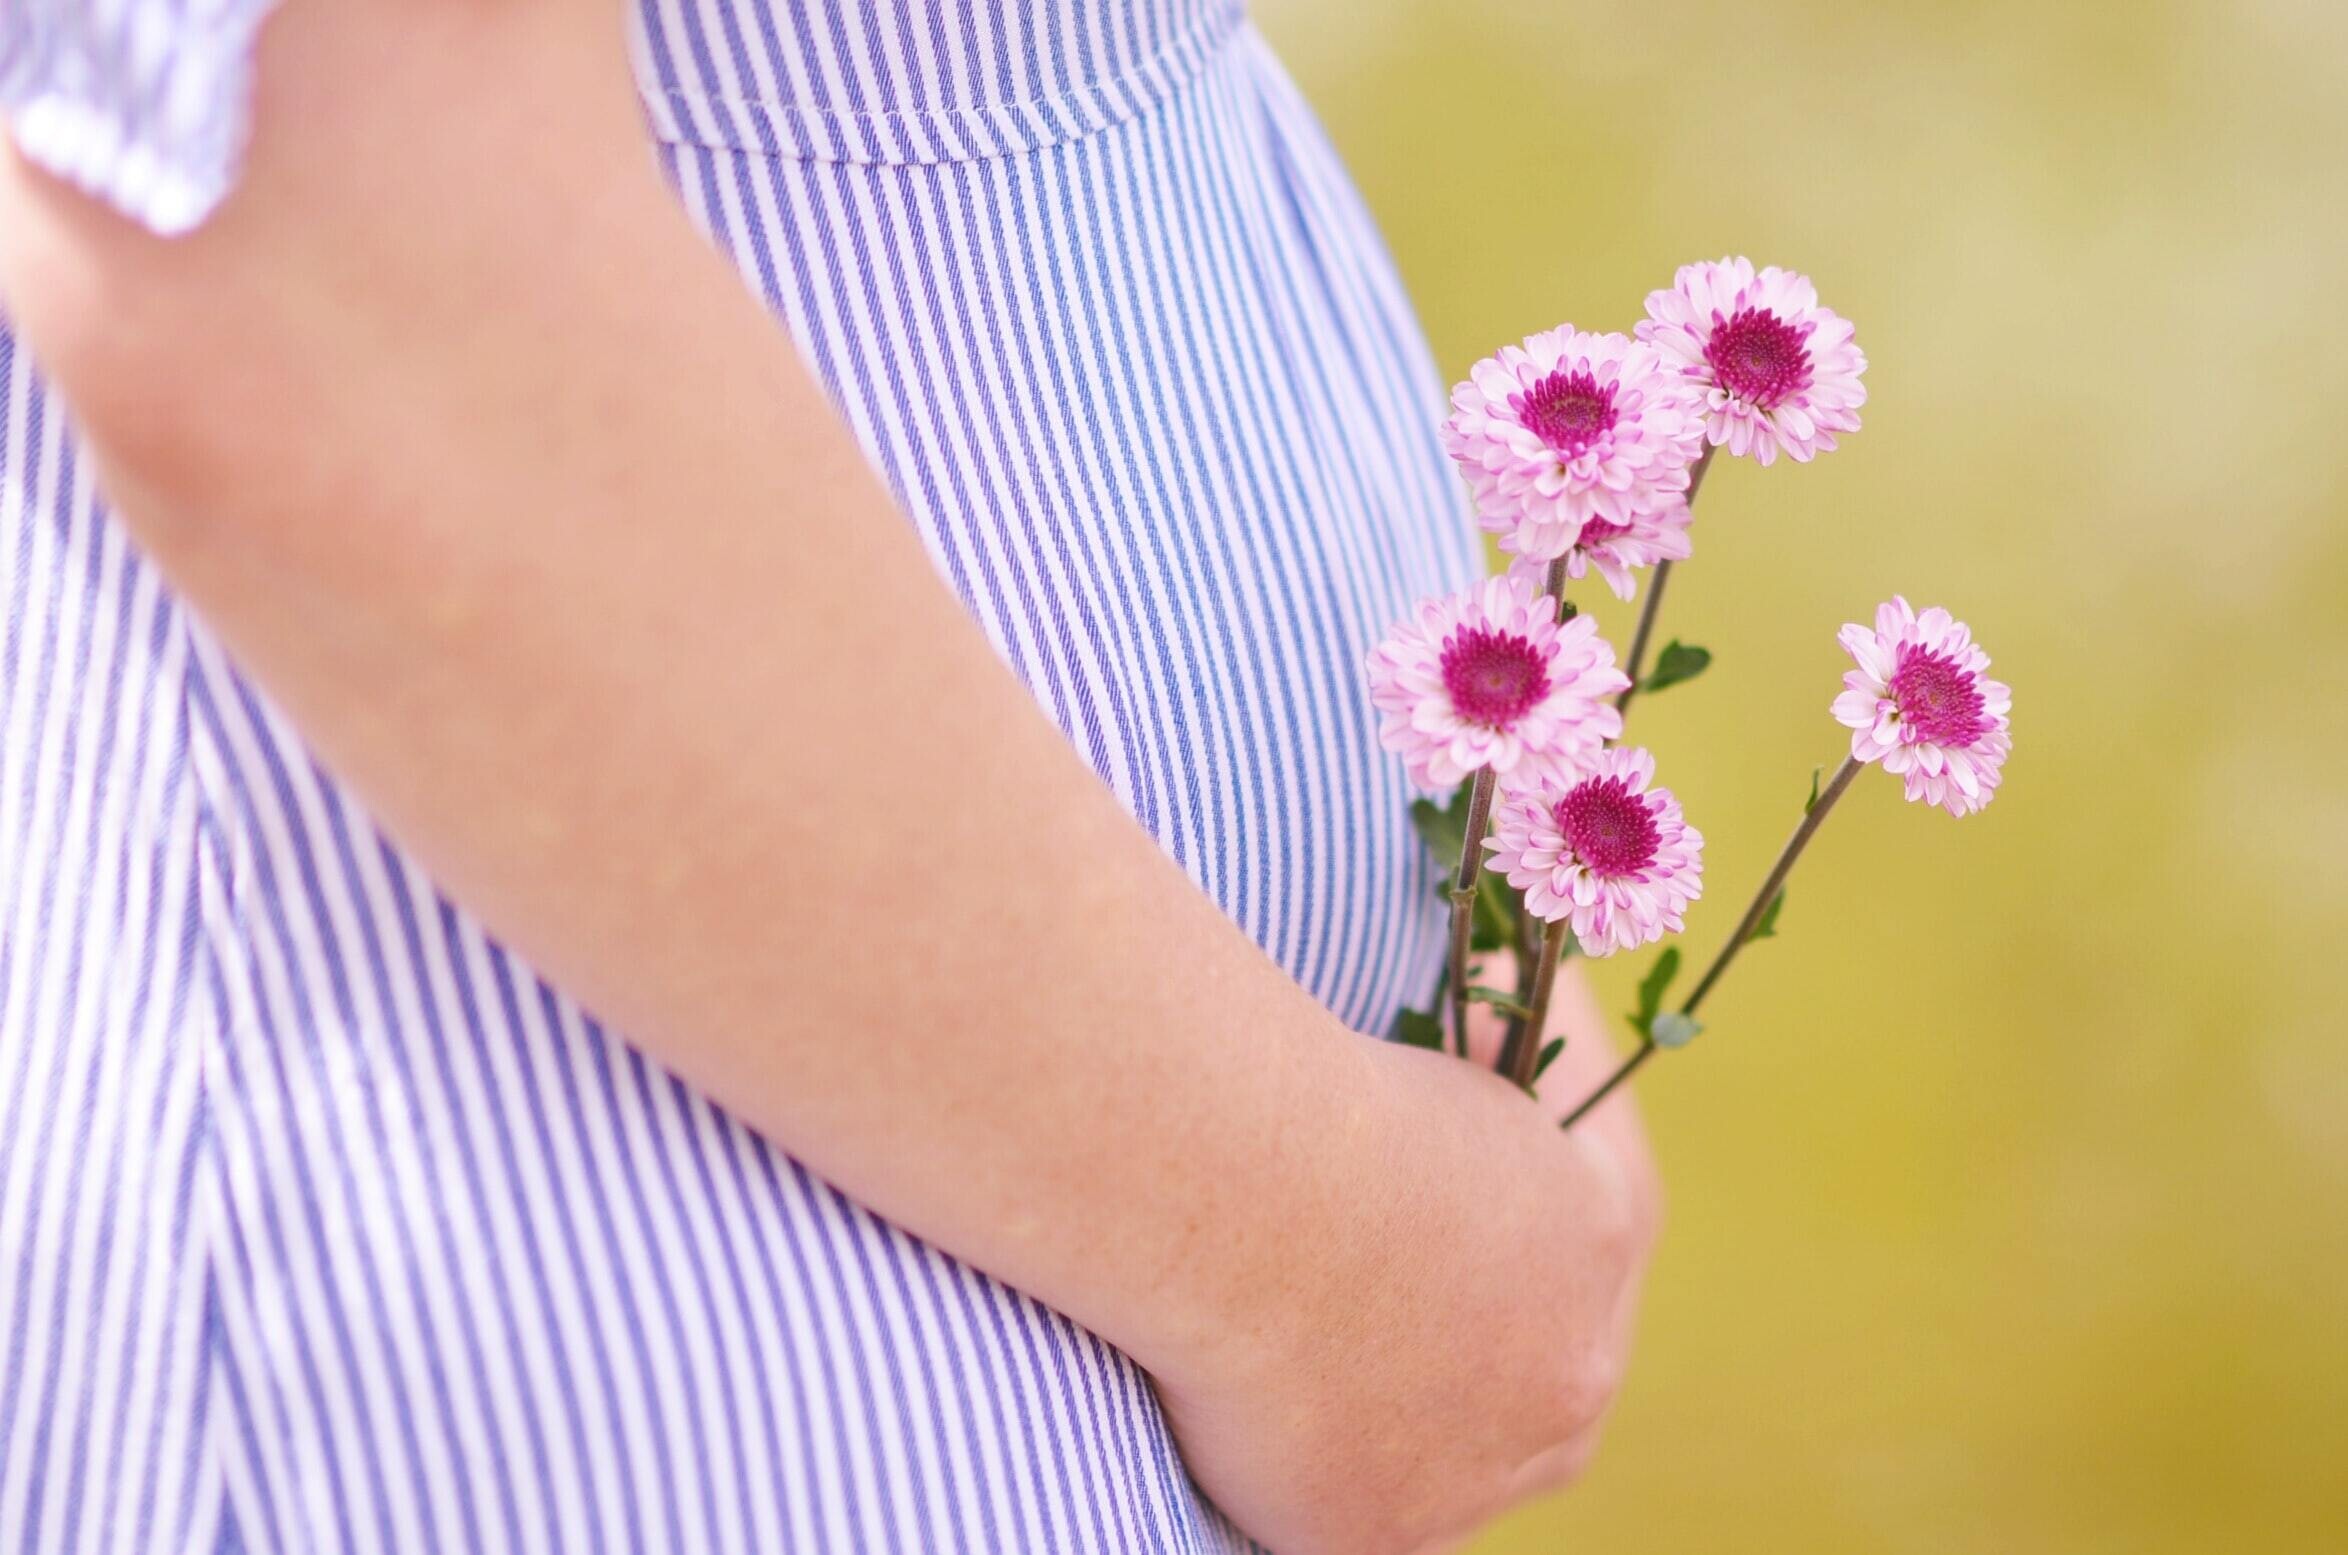 pregnant person holding stomach and holding pink flowers